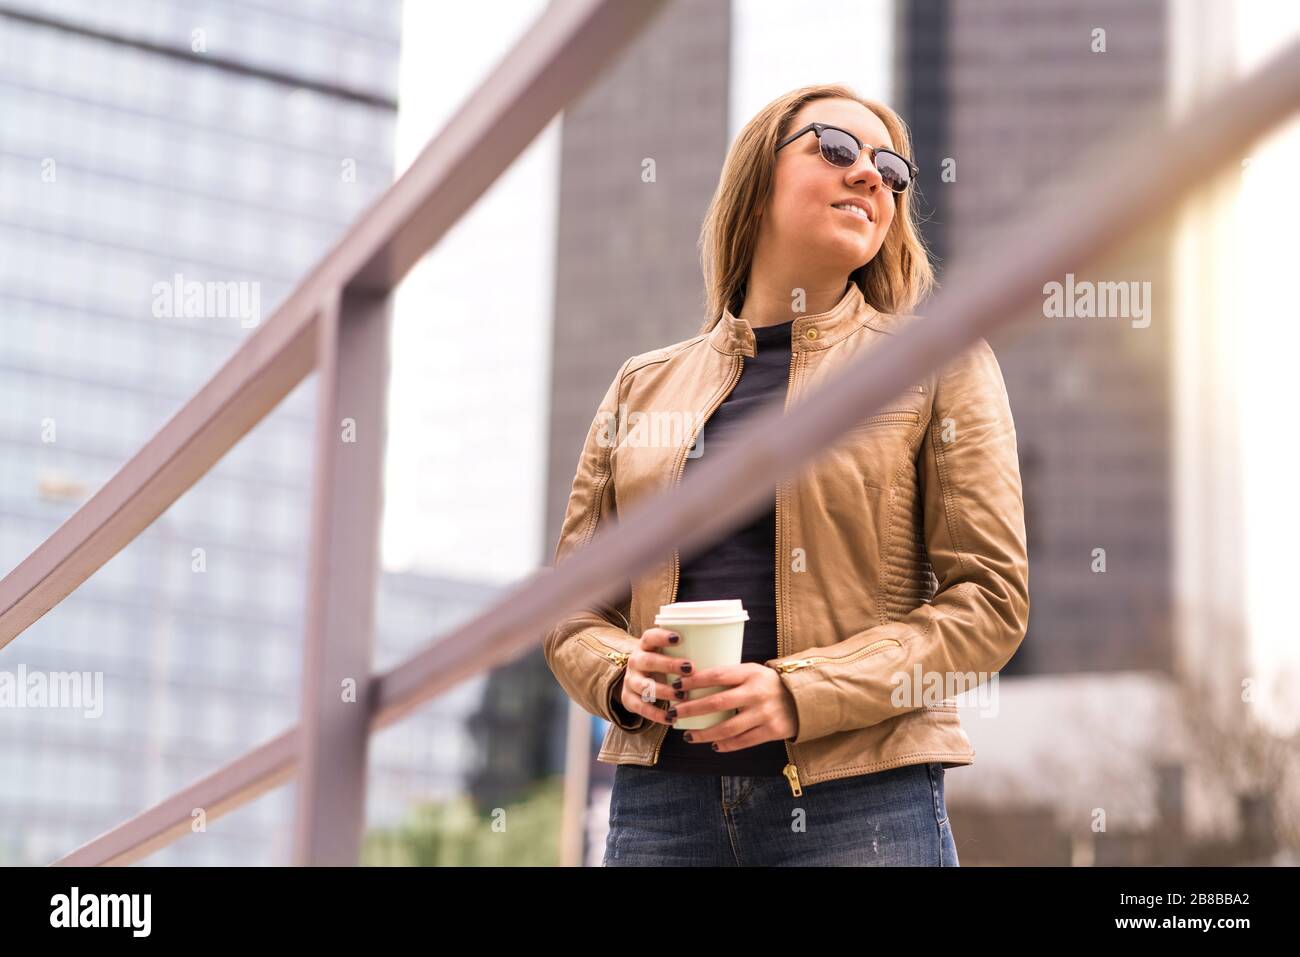 Happy relaxed woman enjoying take away cup of coffee in city street. Lady having coffee break in downtown. Tourist or business person. Stock Photo